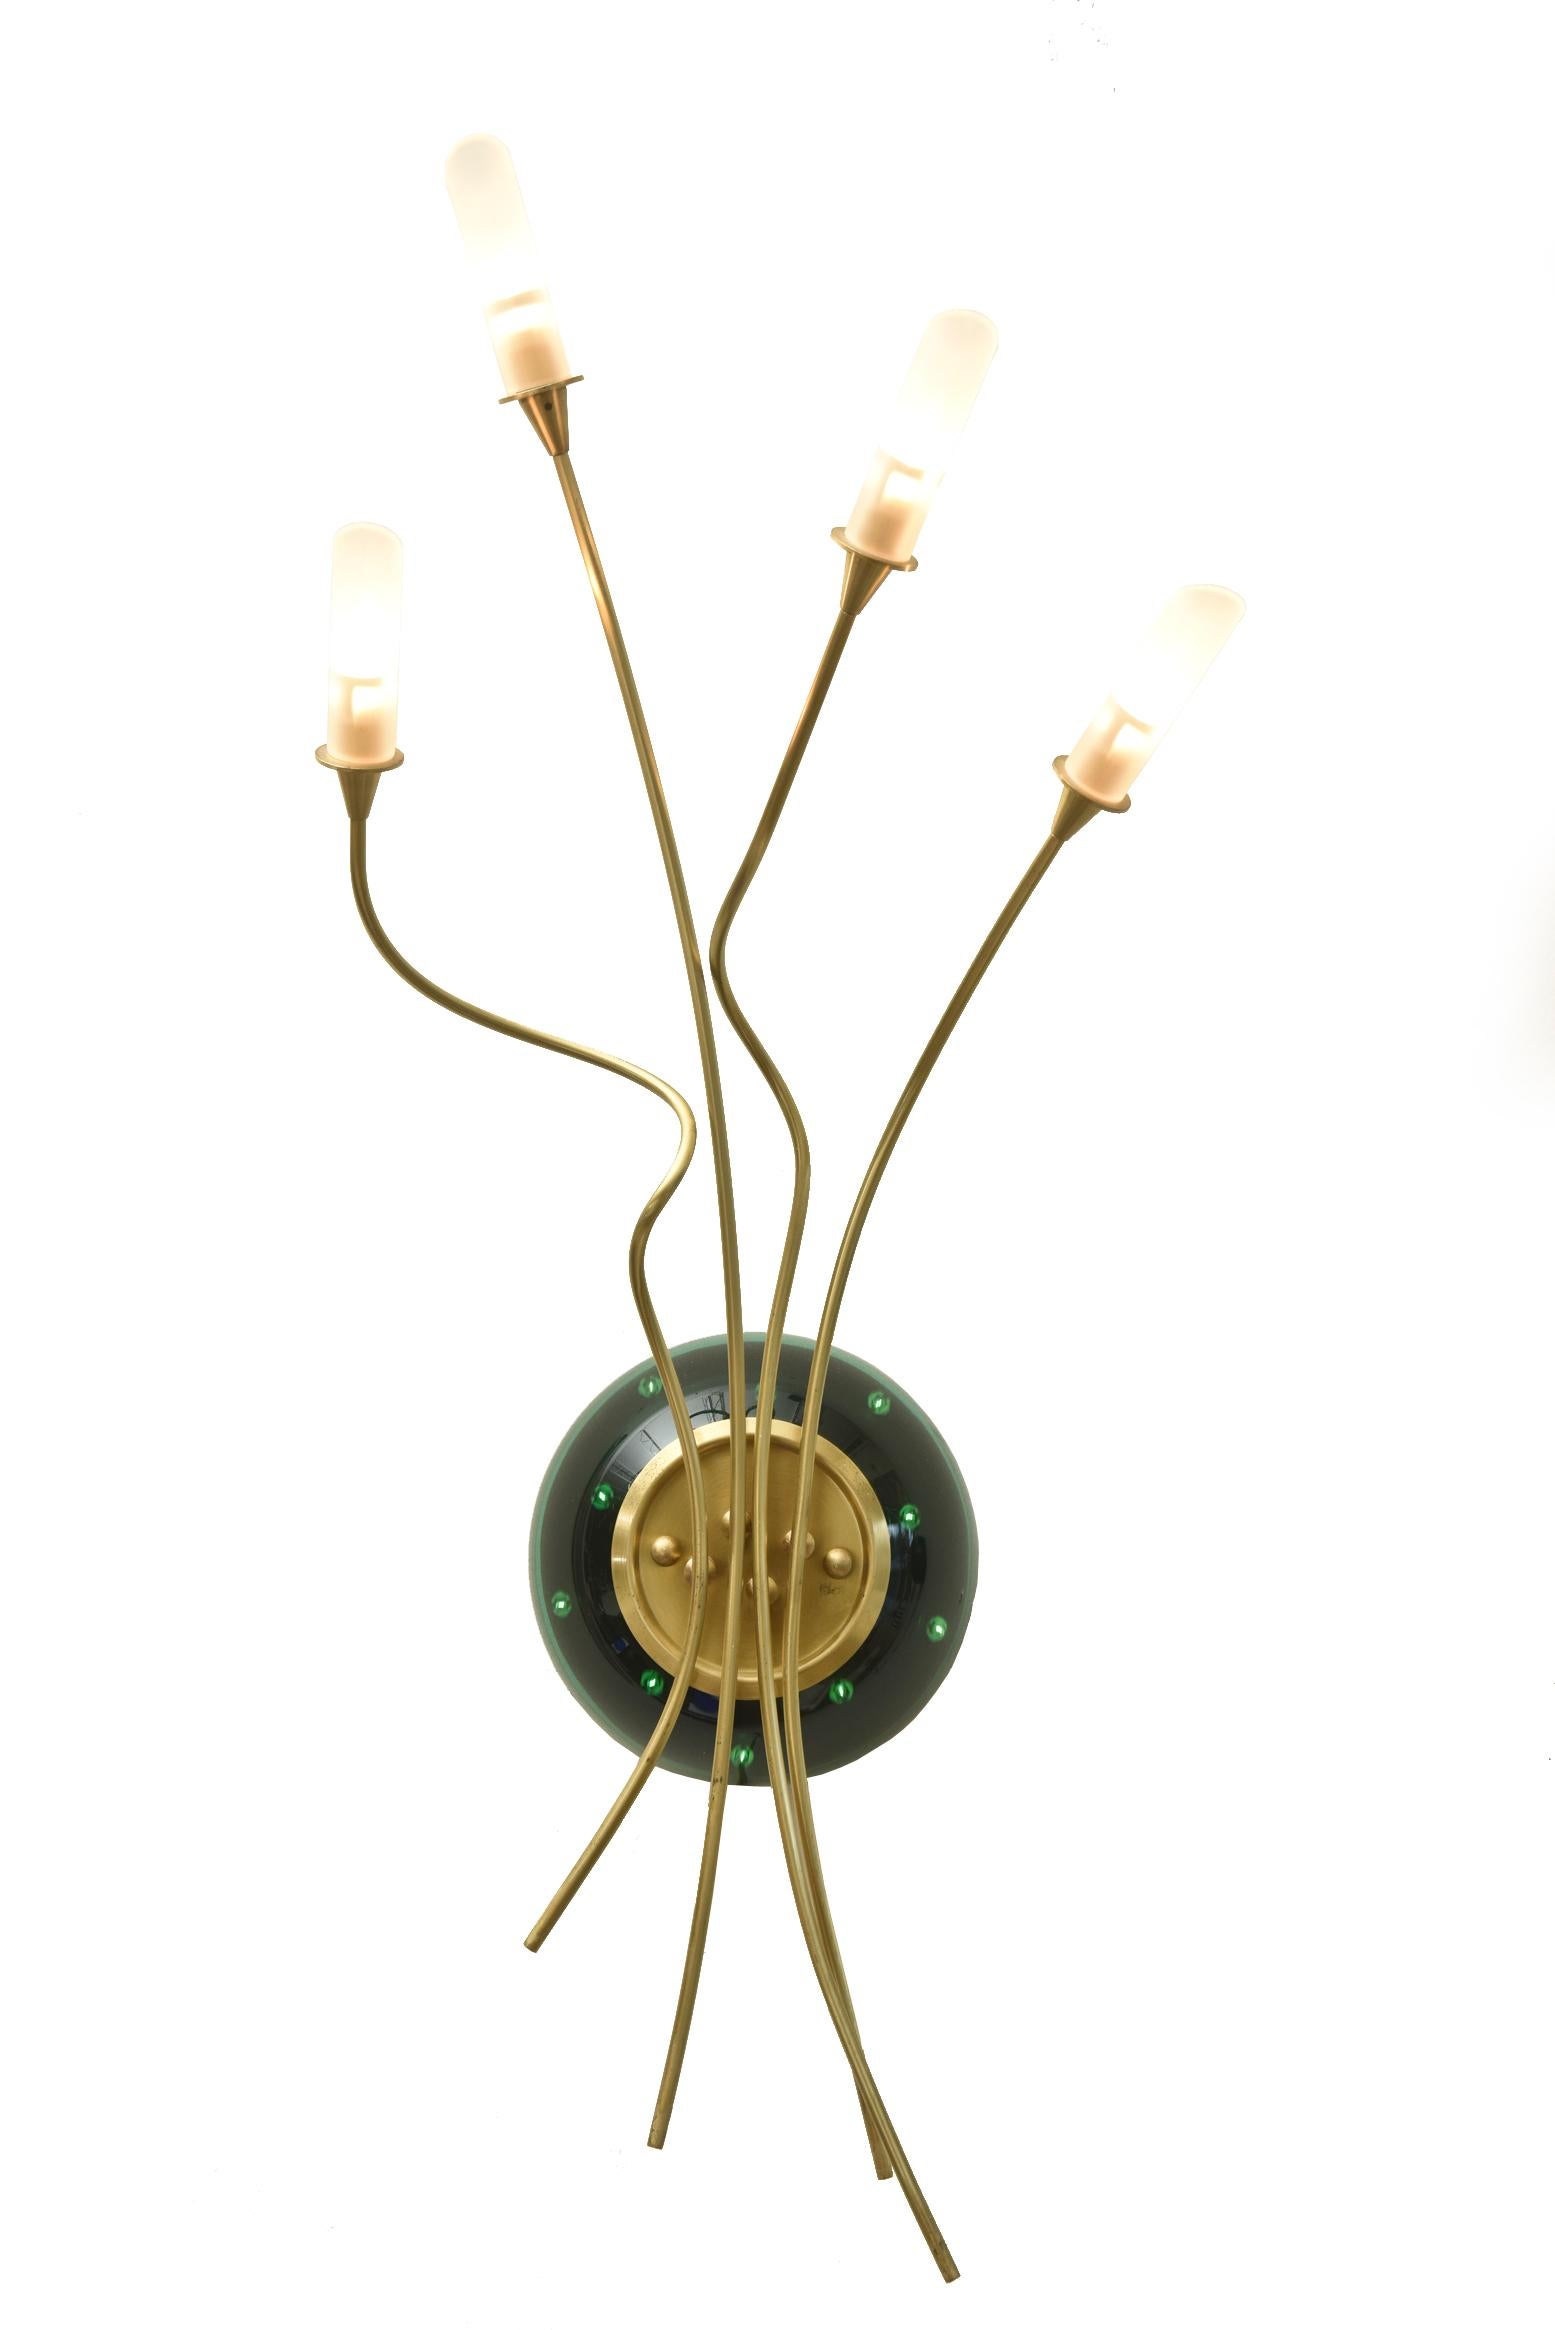 Unknown Contemporary Pair of Sculptural Murano Glass Infinity and Brass Sconces